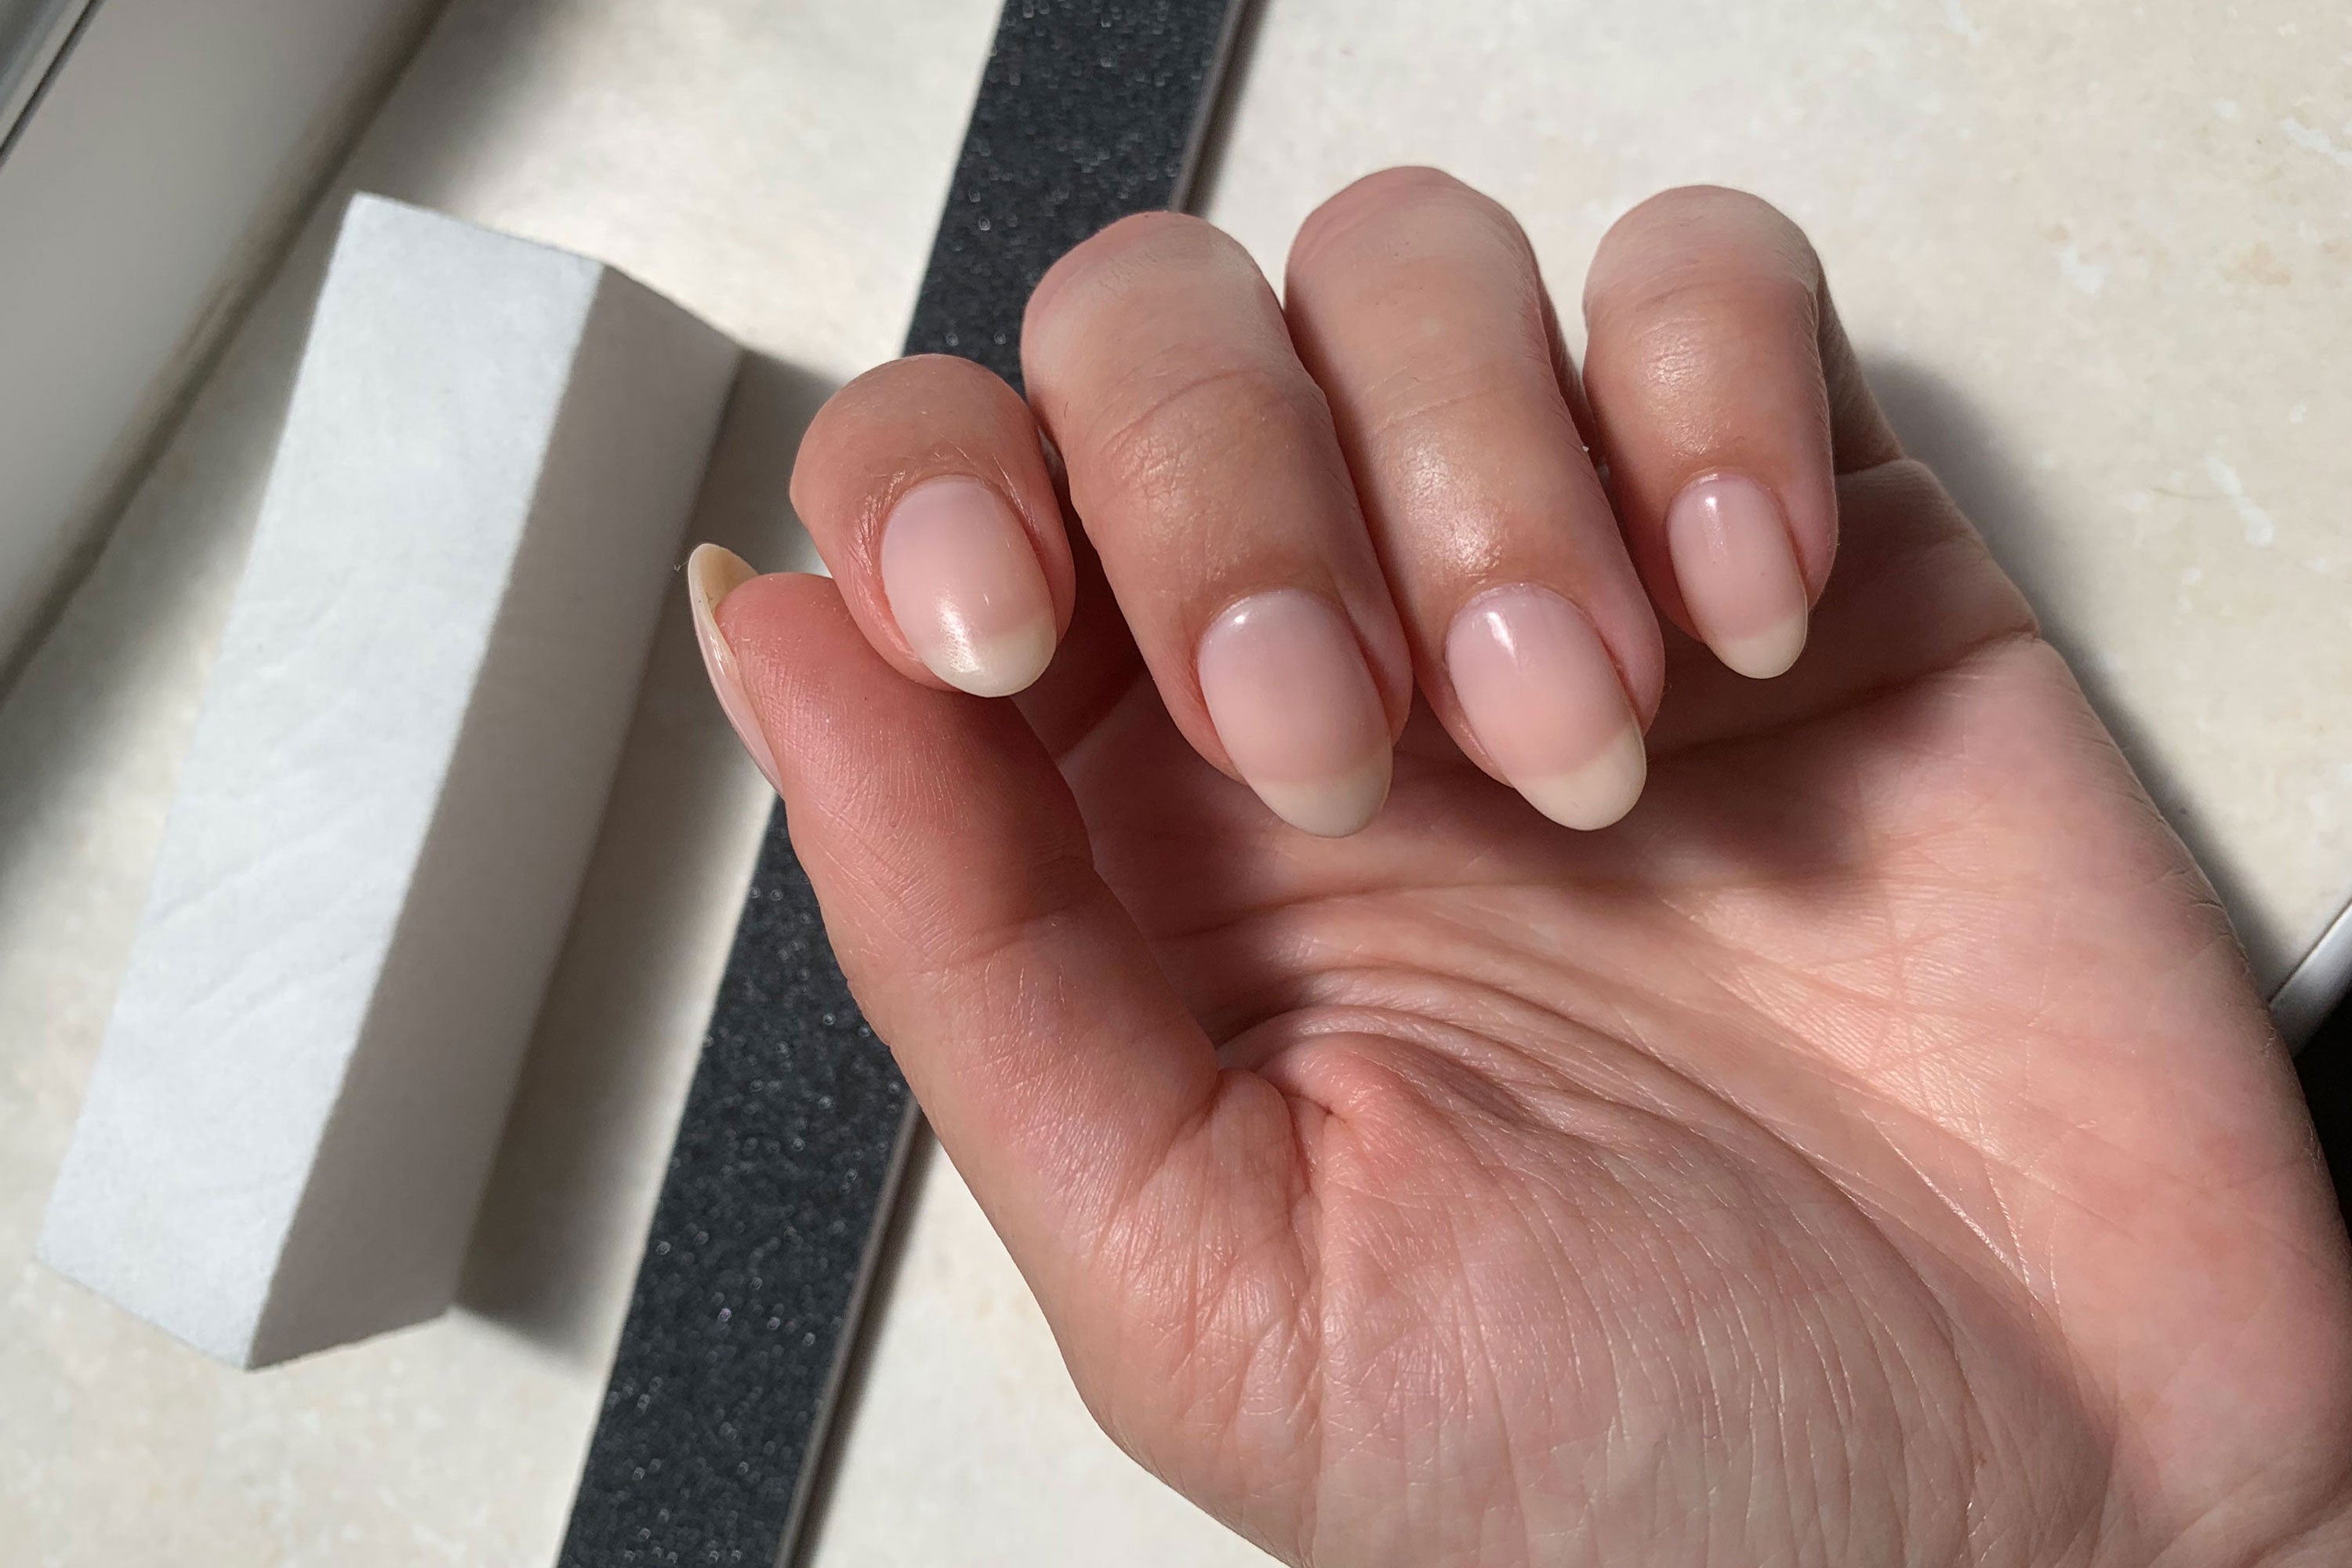 How To Fix A Torn Nail (Or Lengthen Your Nails!) With Household Supplies |  DipWell